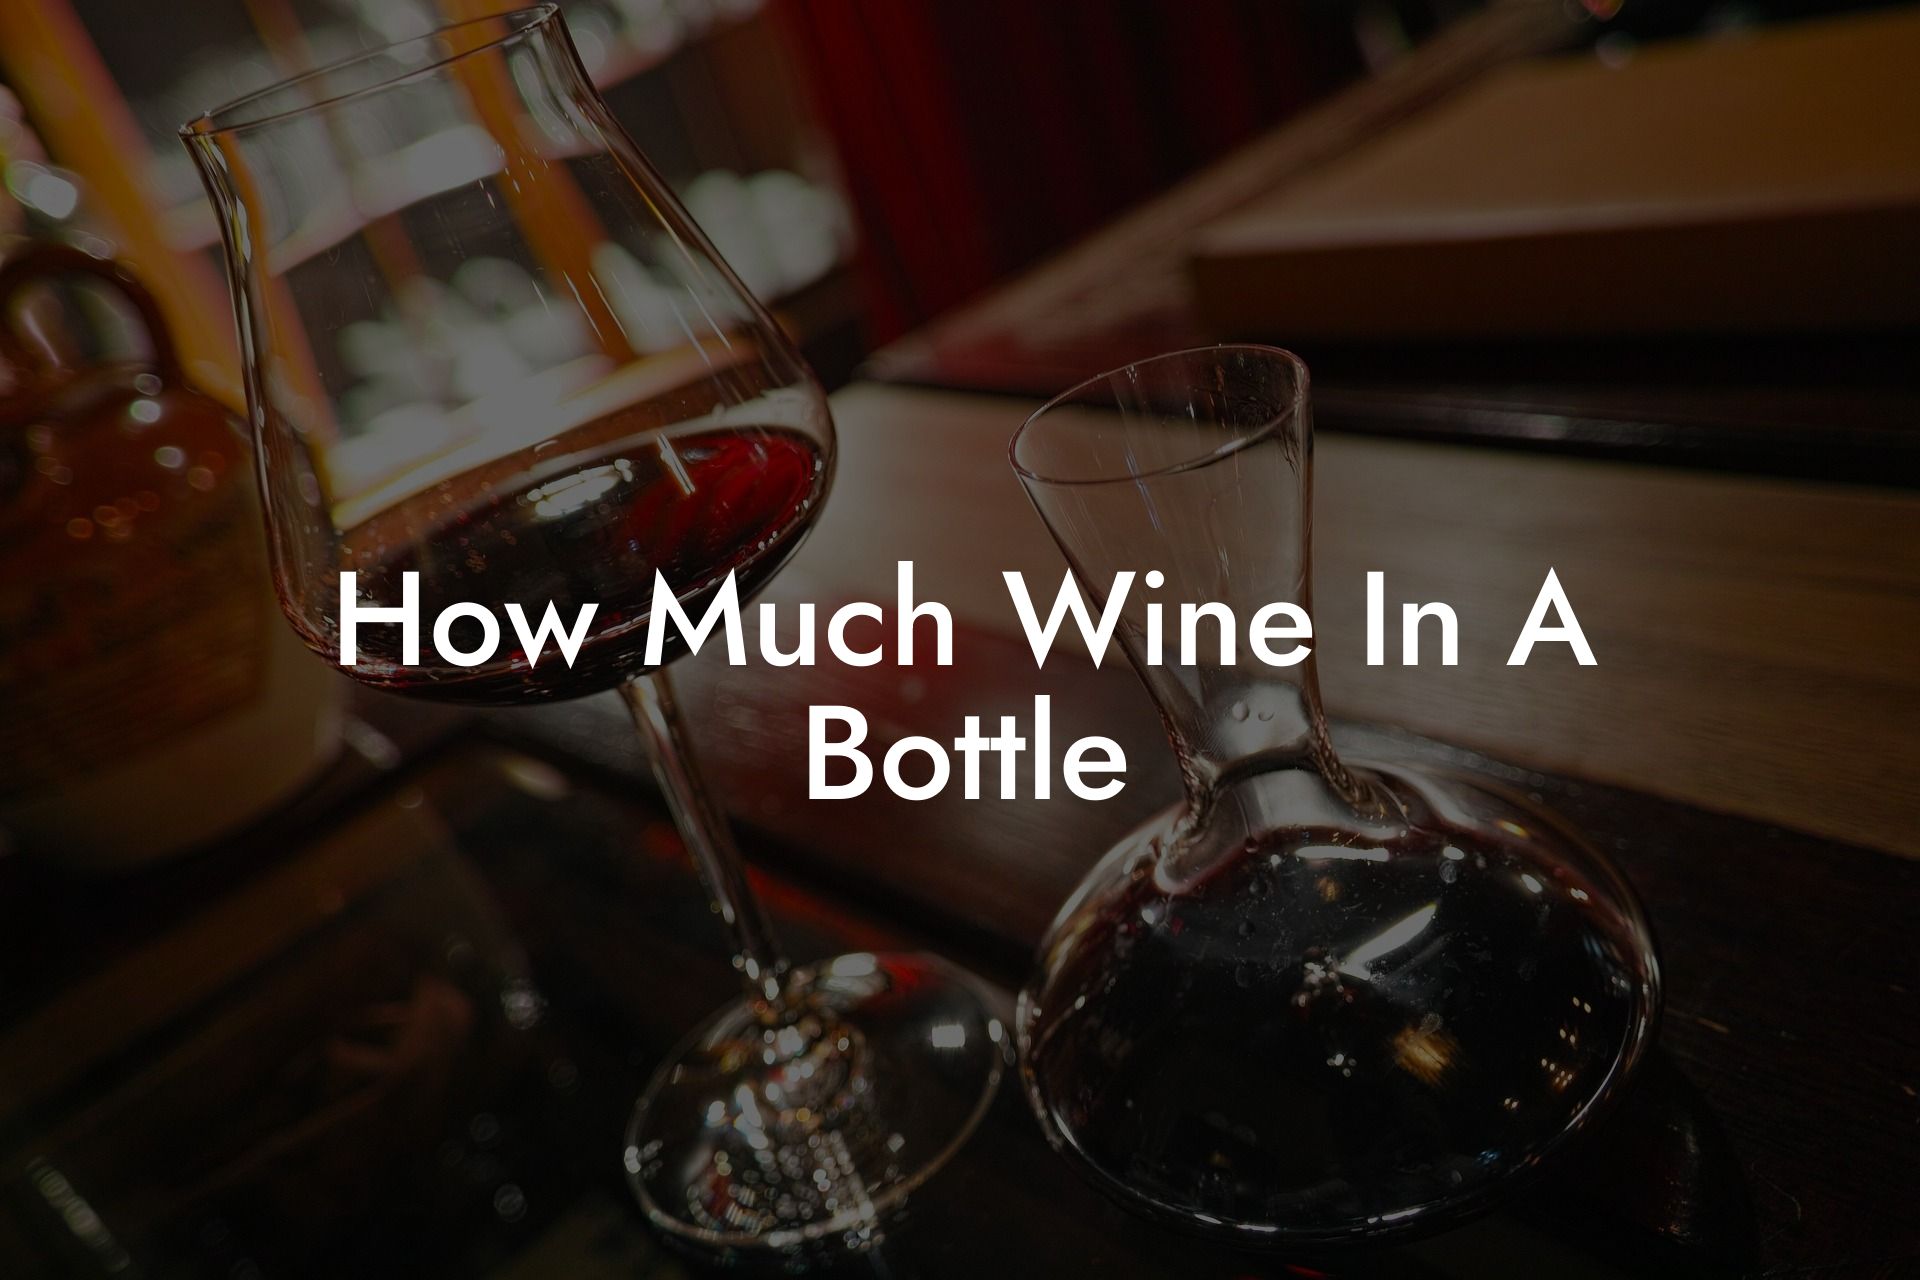 How Much Wine In A Bottle